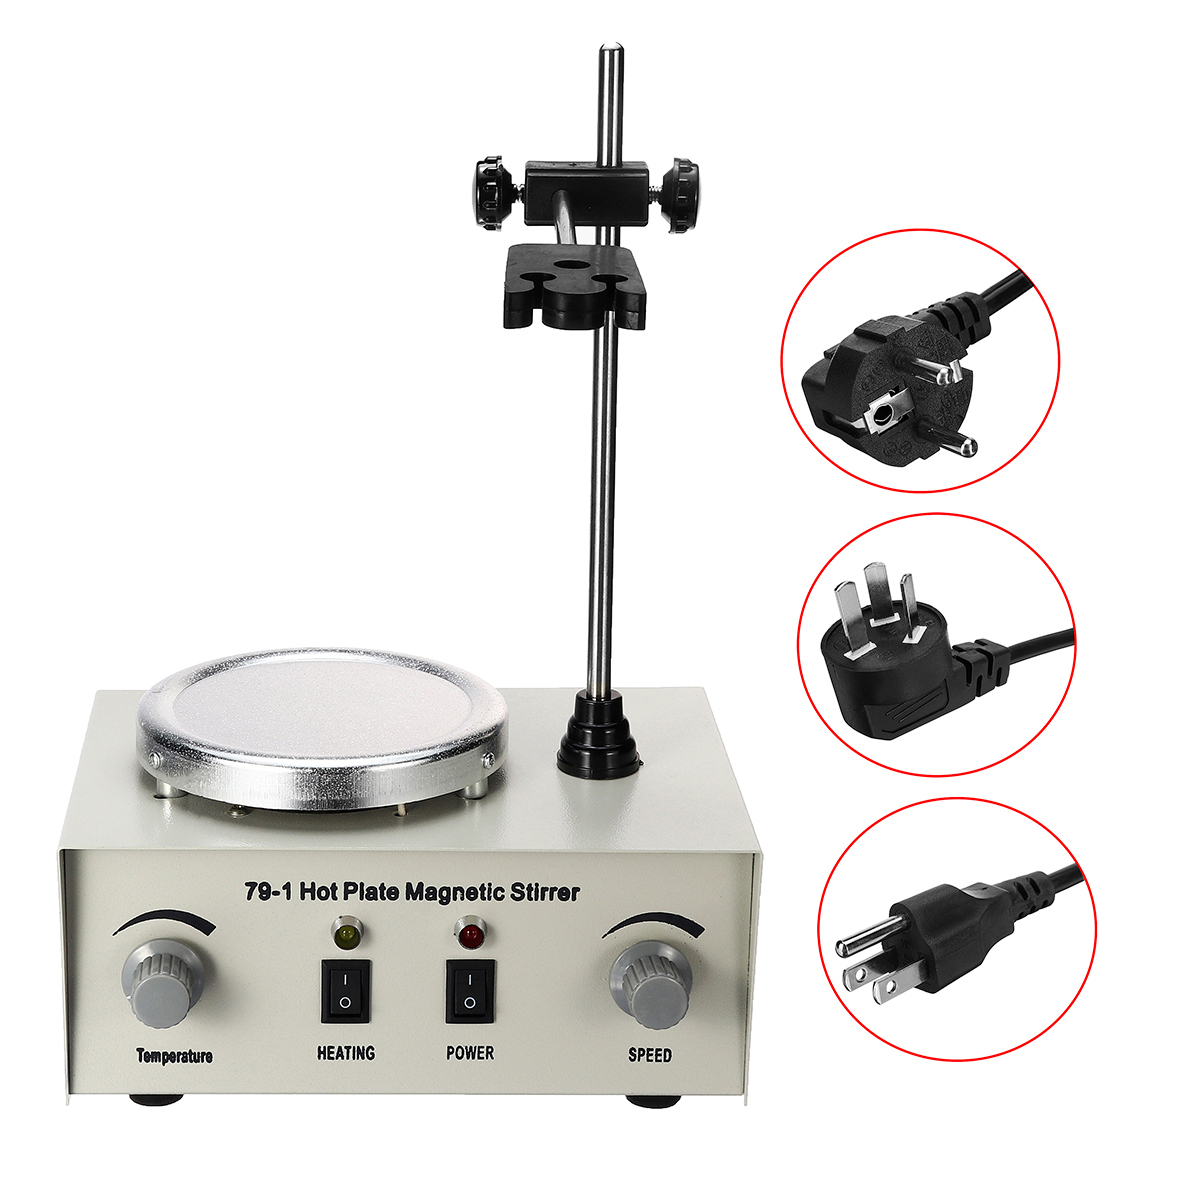 79-1-1000ML-Hot-Plate-Magnetic-Stirrer-Lab-Heating-Mixer-Temperature-Speed-Adjustable-1298966-4